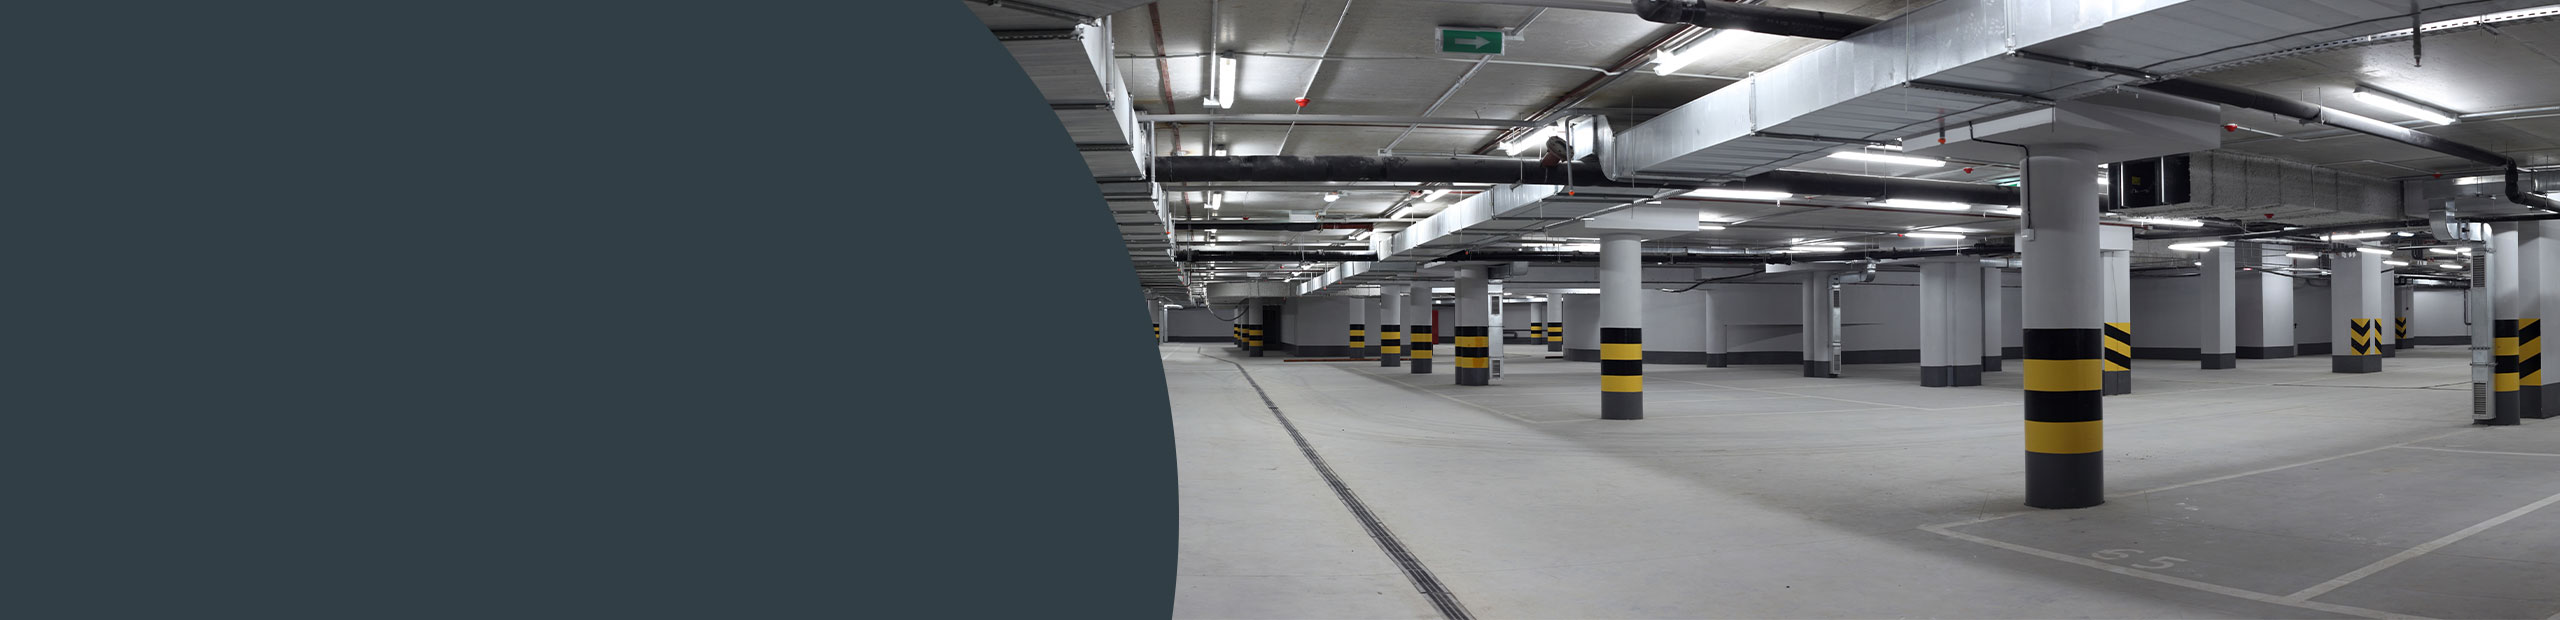 Car Park Cleaning Company - Hammersmith & Fulham